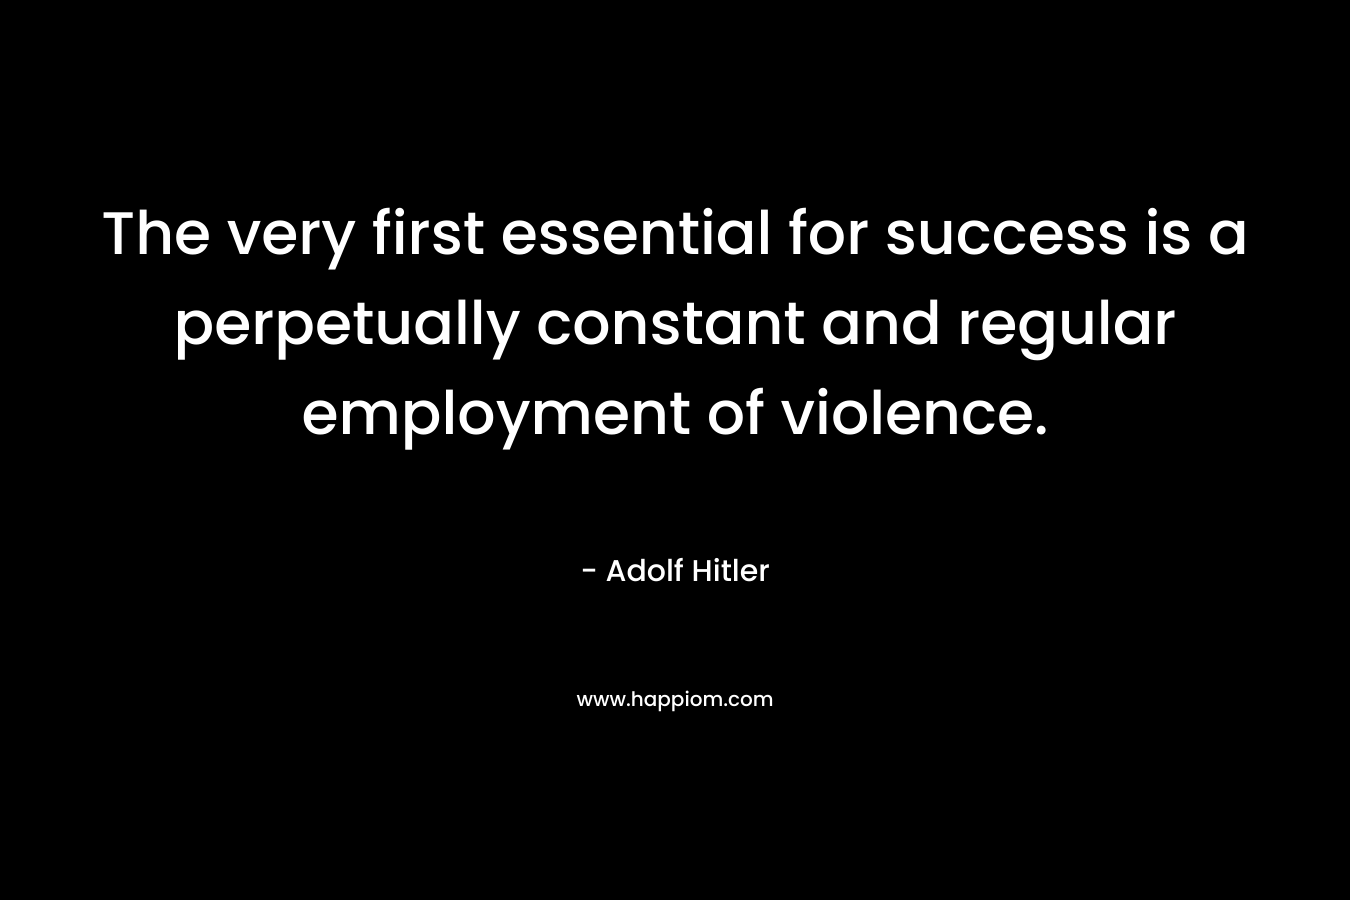 The very first essential for success is a perpetually constant and regular employment of violence. – Adolf Hitler